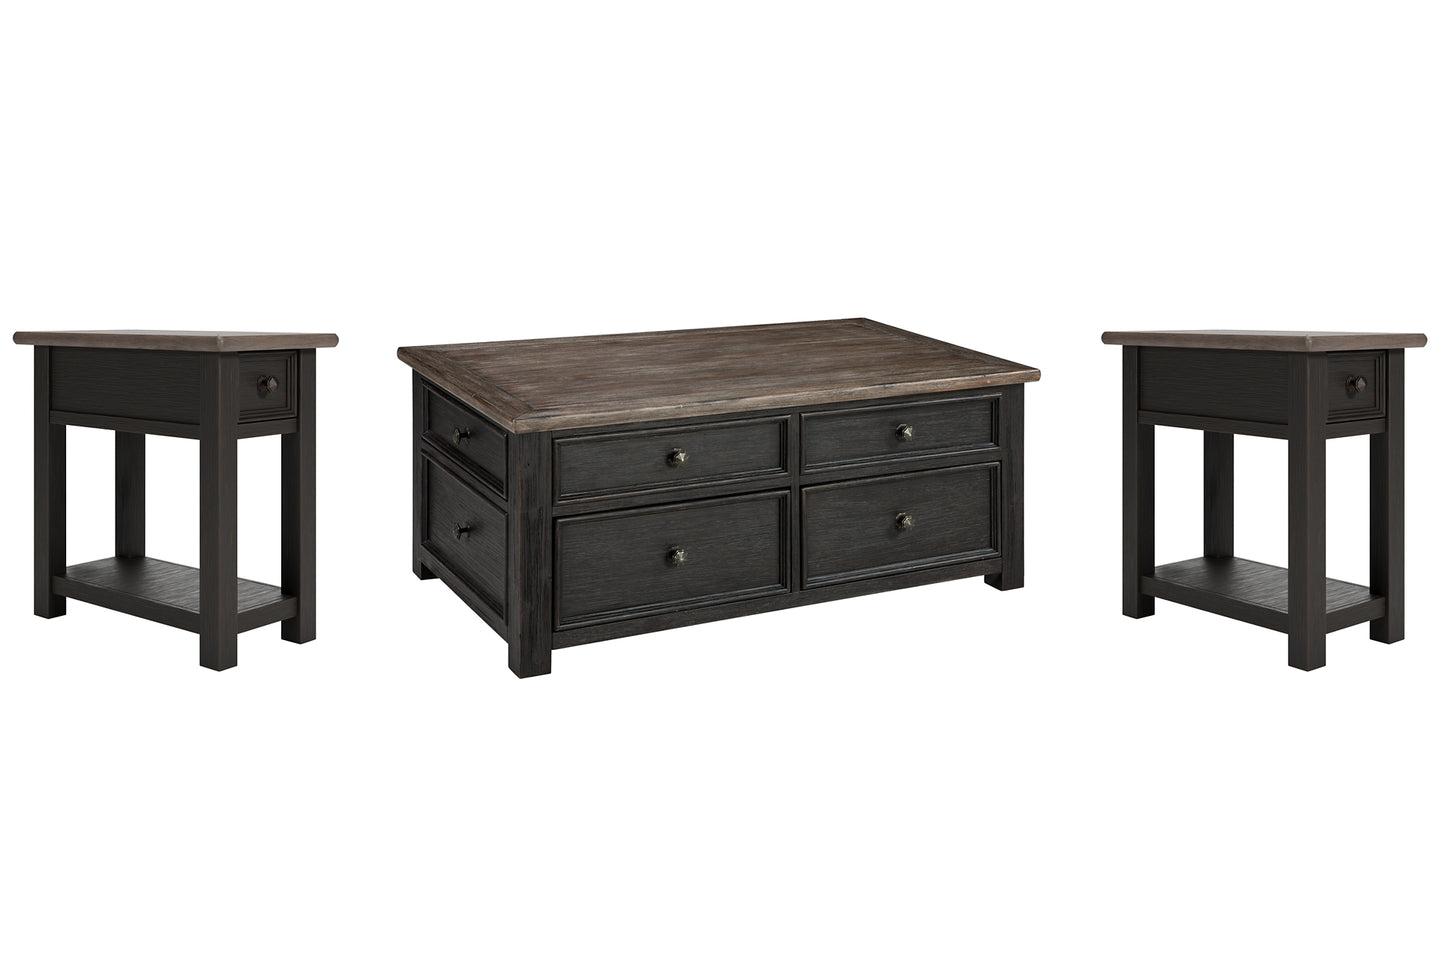 Ashley Express - Tyler Creek Coffee Table with 2 End Tables